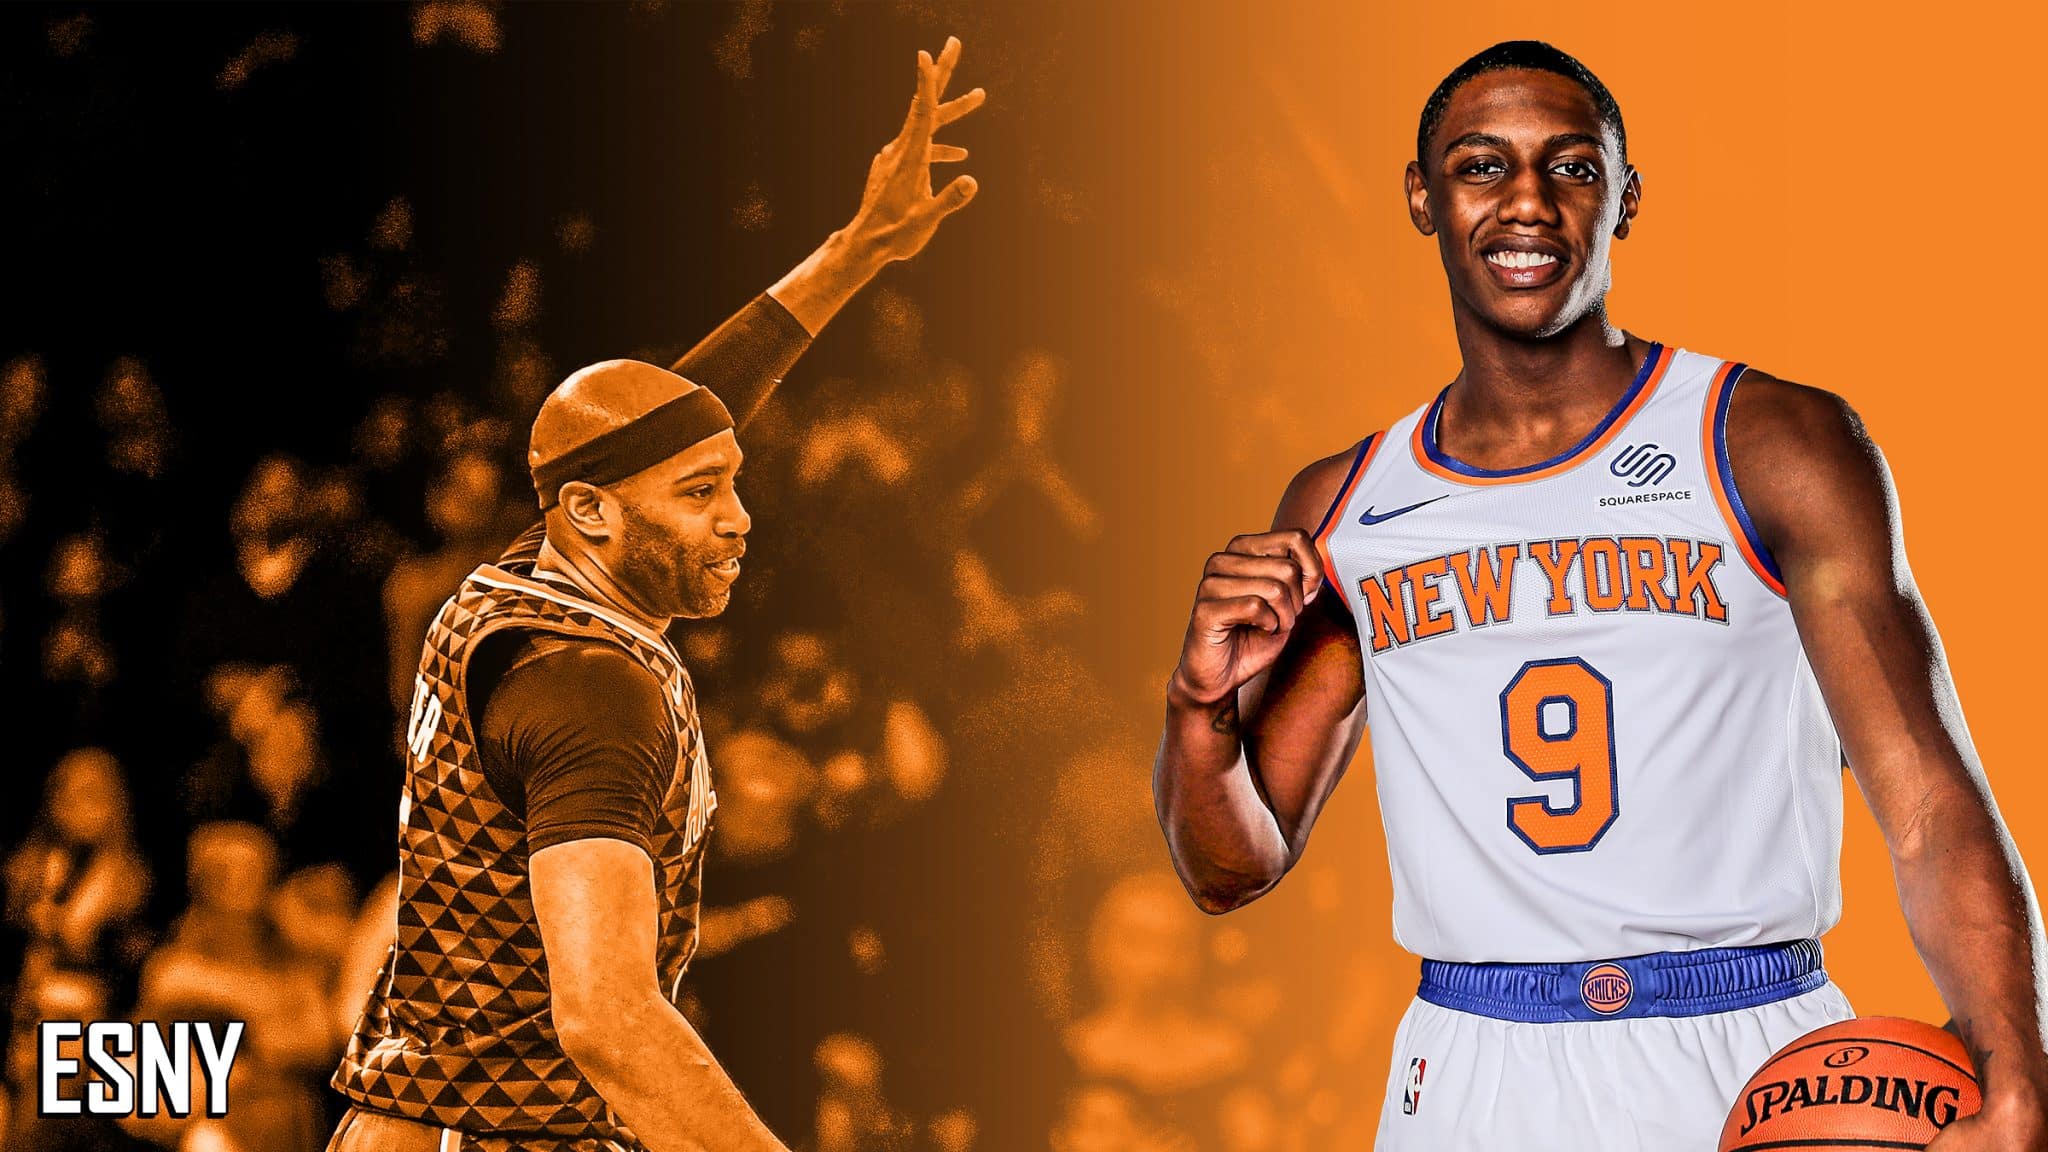 Vince Carter passes the torch to Knicks' RJ Barrett during MSG farewell